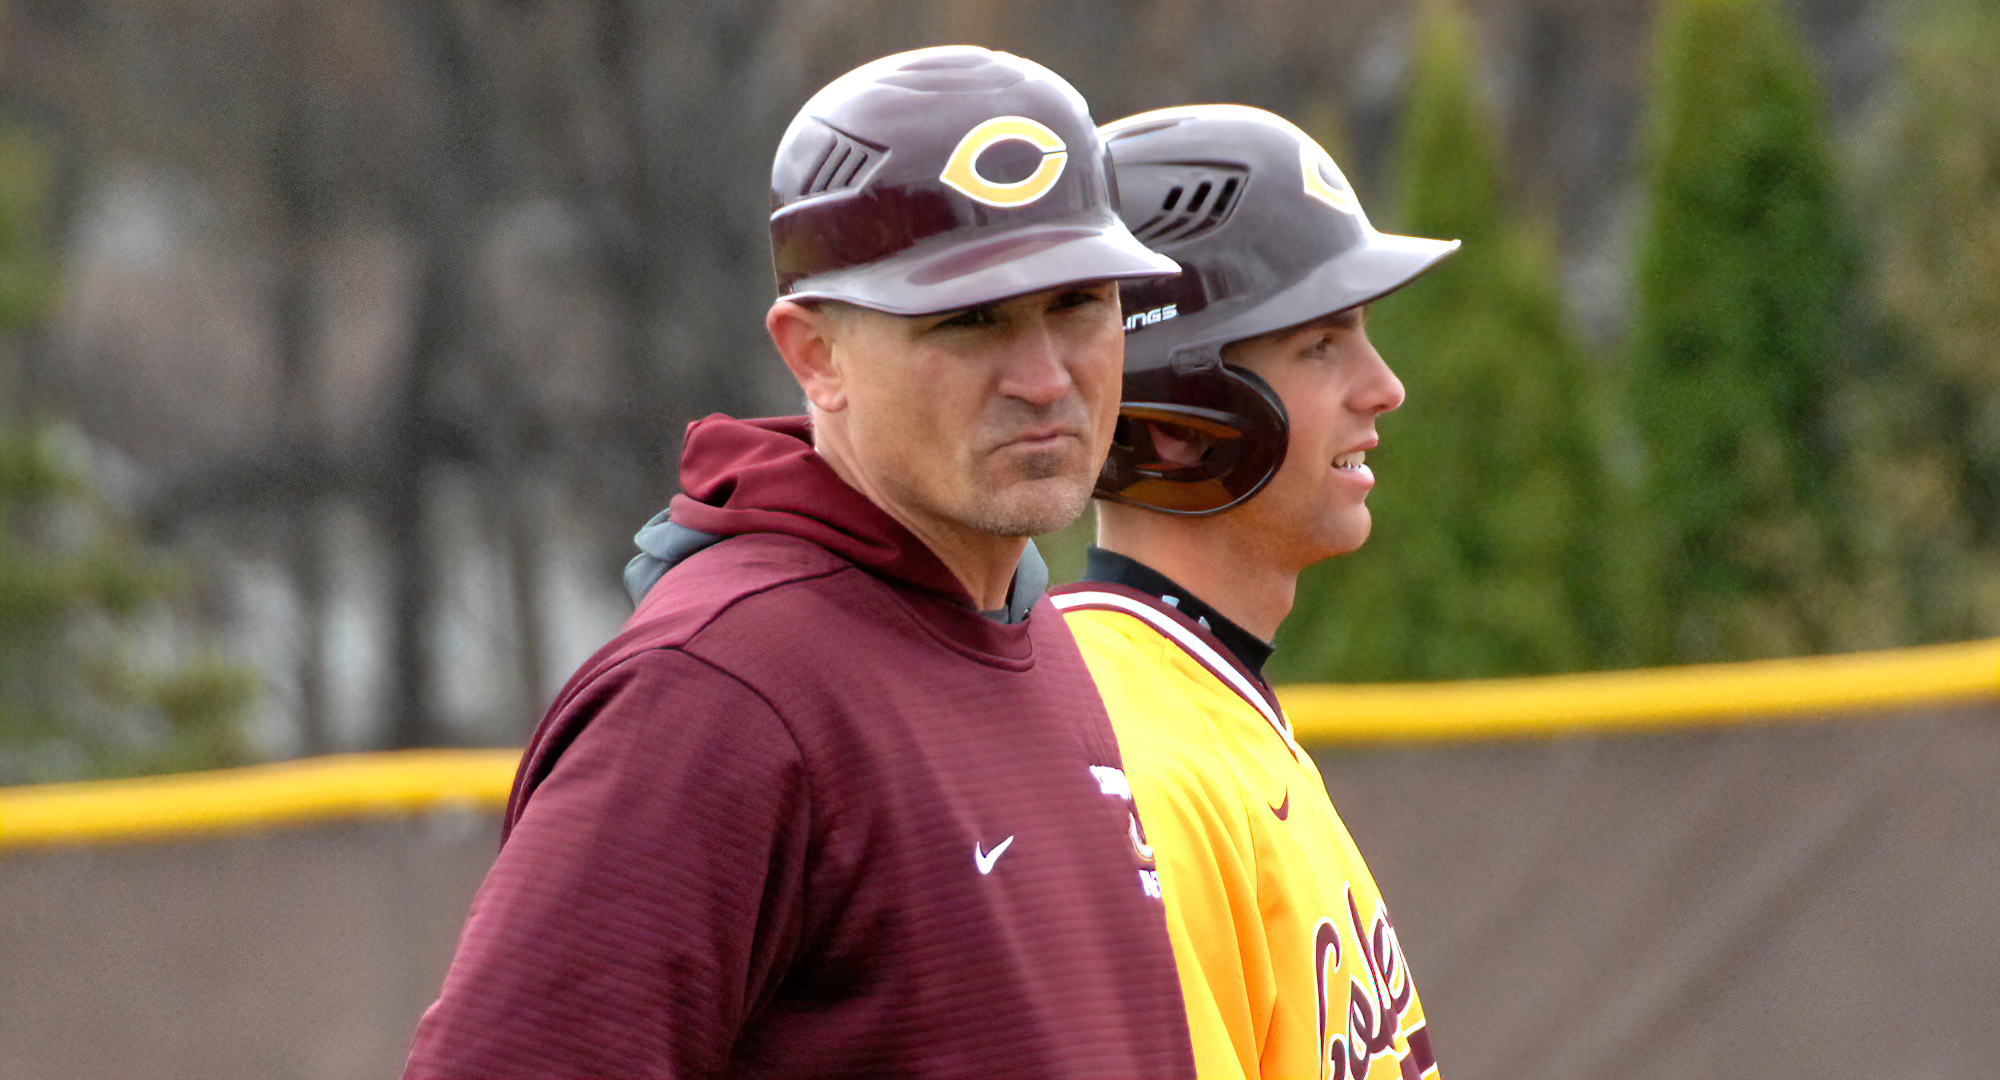 Chris Coste announced that he will step down as head coach of the Concordia baseball program at the end of the 2023 season.